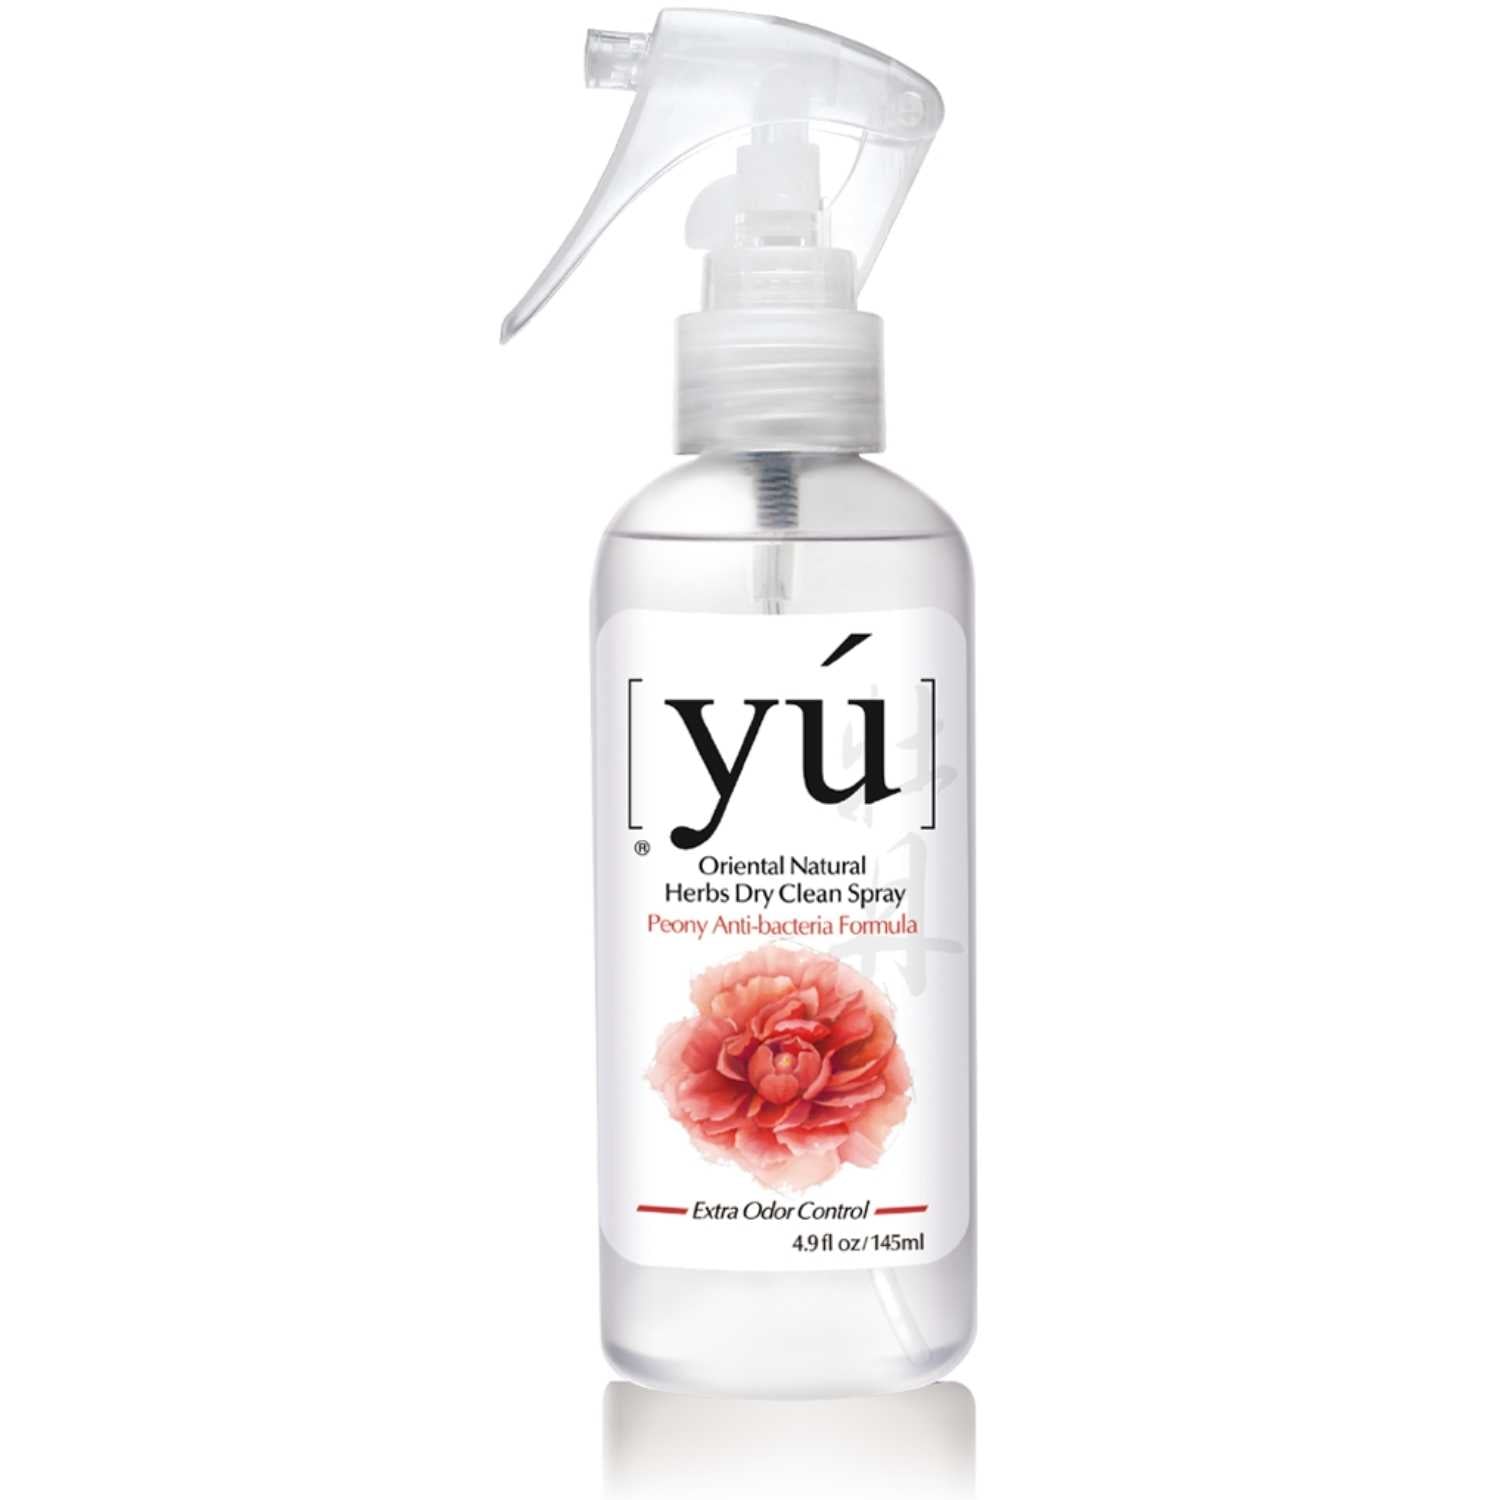 YU - Peony Anti-Bacteria Dry Clean Spray for Dogs & Cats (145ml)